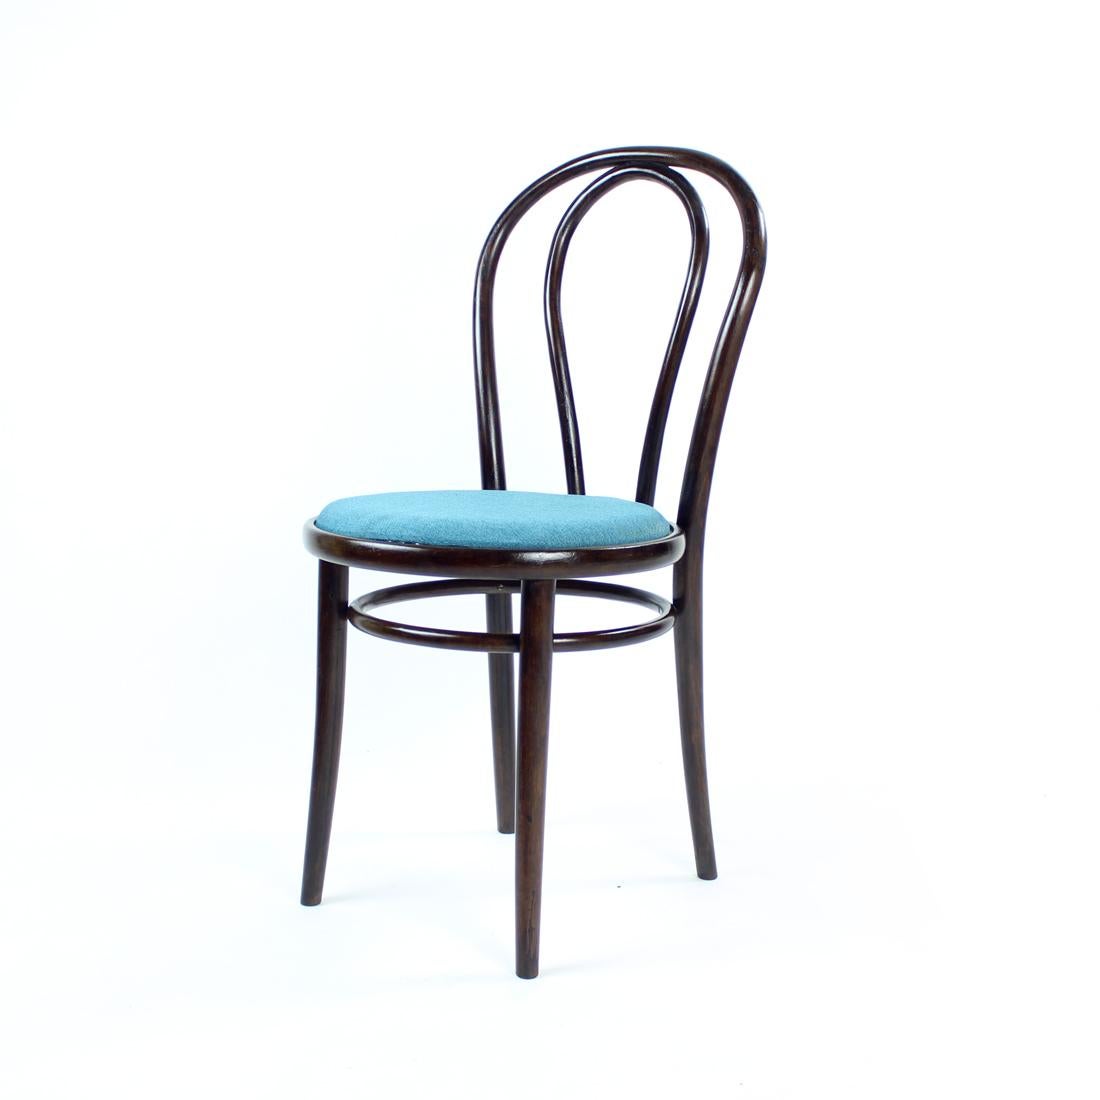 Mid-20th Century Thonet No. 16 Bistro Chair Model by Ton, Czechoslovakia 1960s For Sale